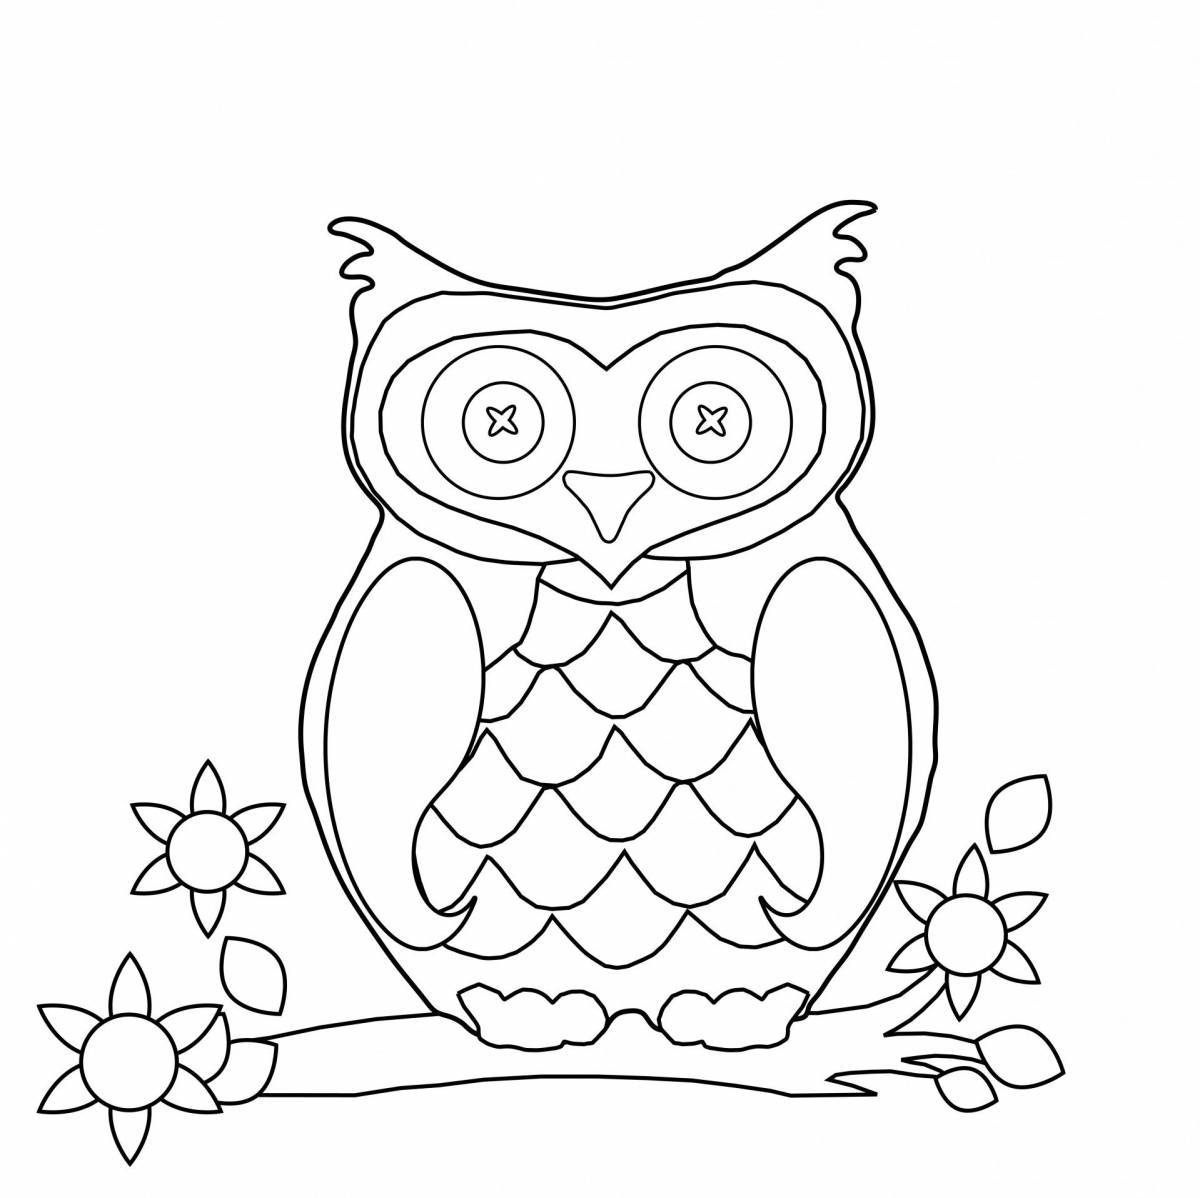 Adorable owl coloring page for kids